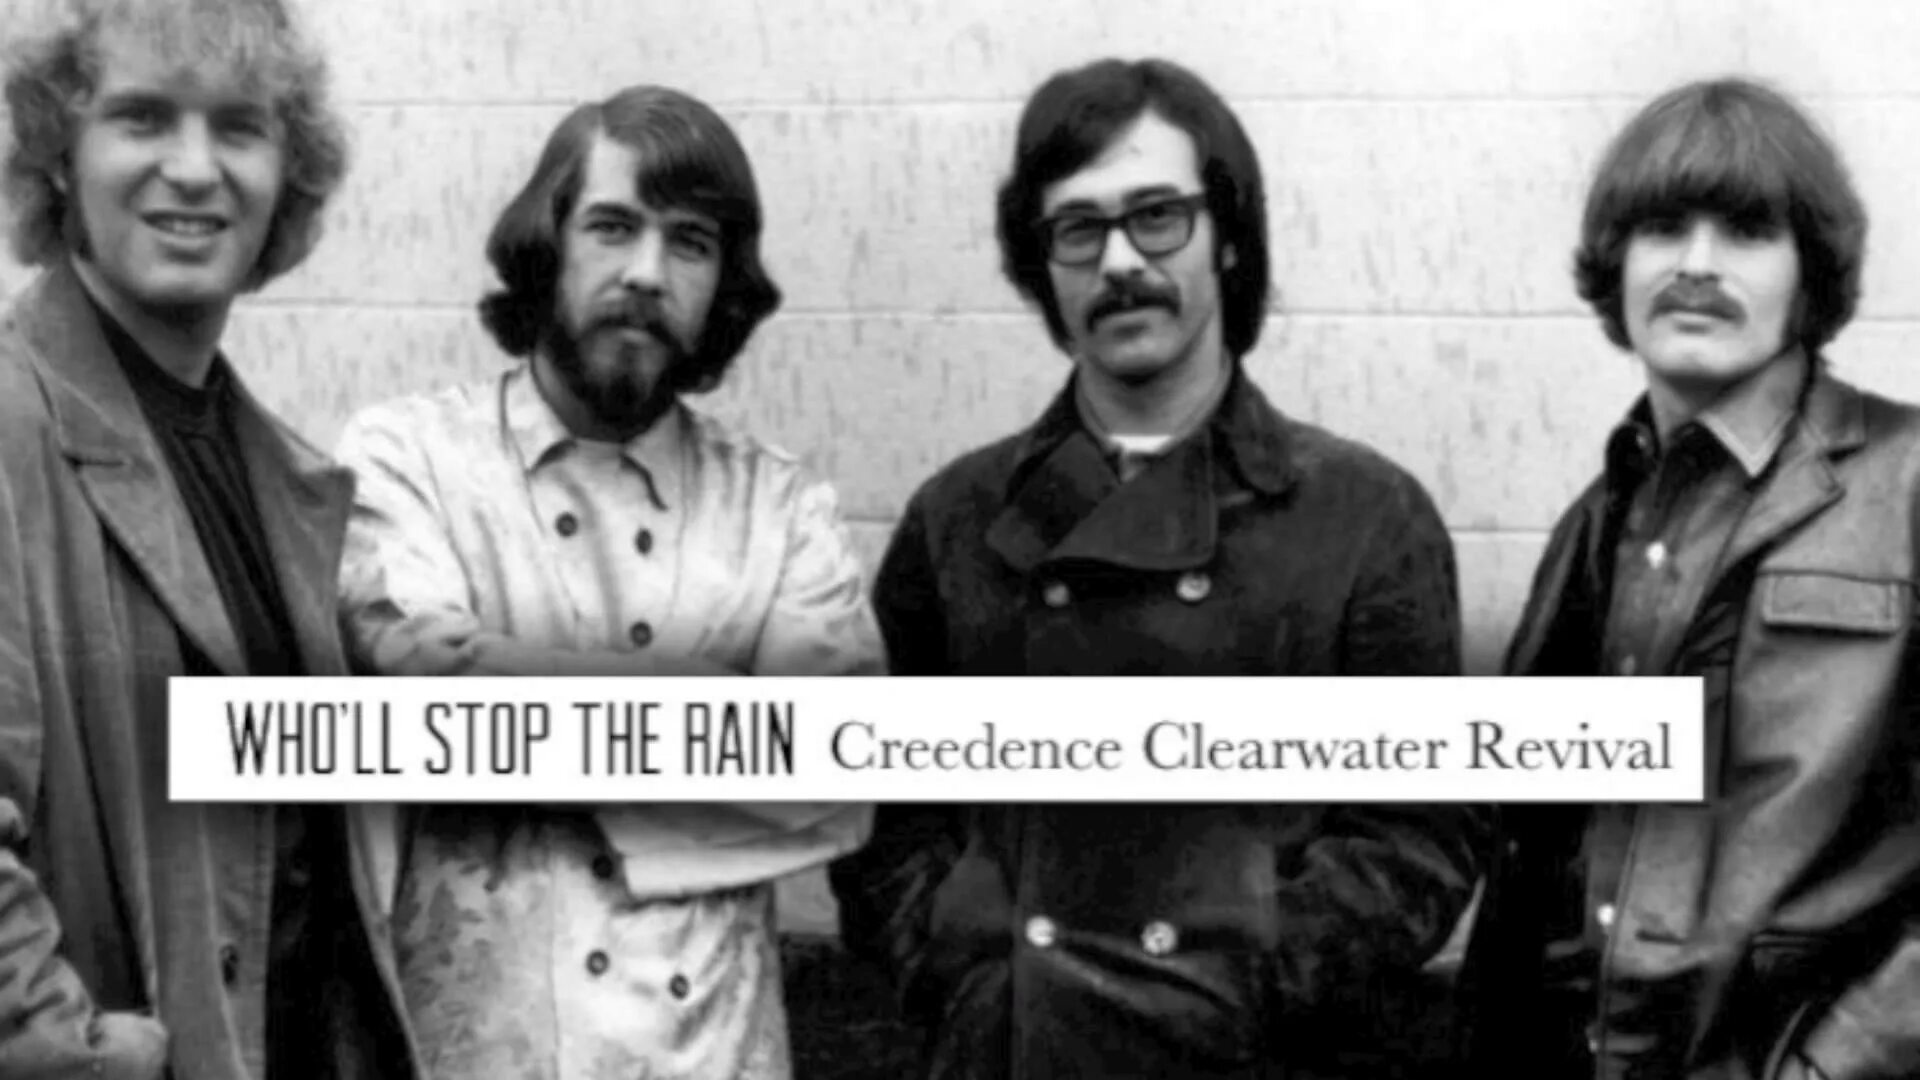 Creedence clearwater rain. Группа Криденс. Creedence Clearwater Revived 25.02.2020. Криденс Ньюболд. Who stop the Rain Creedence Clearwater Revival.